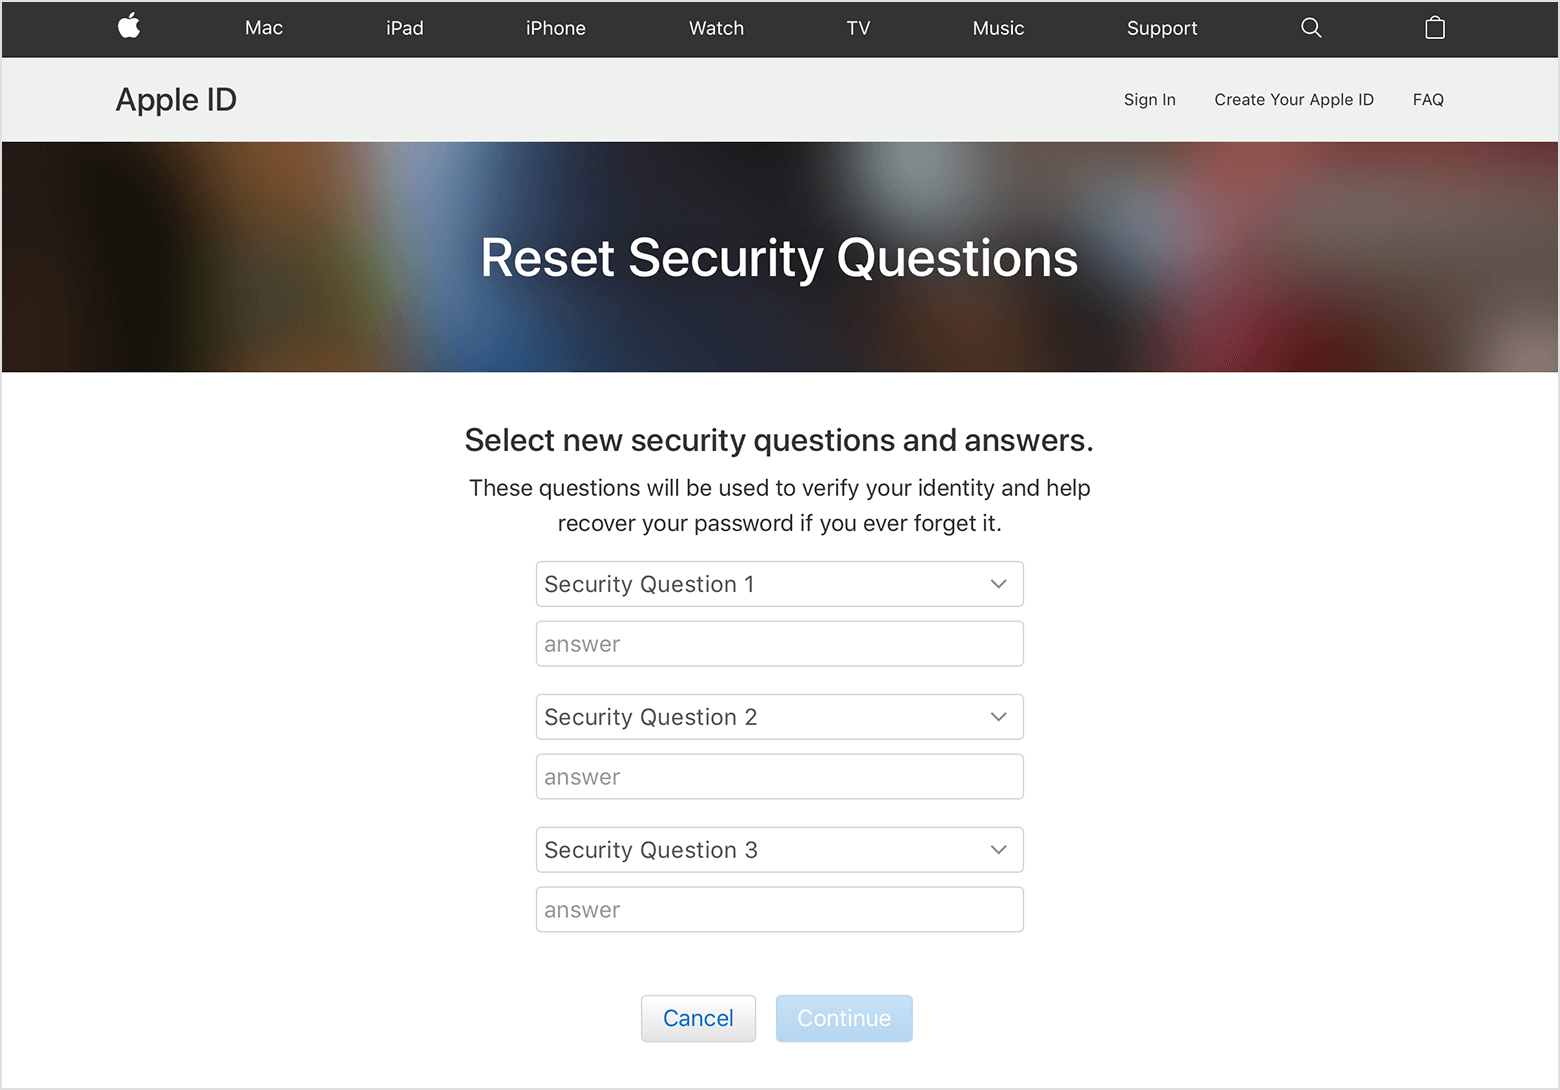 If you forgot the answers to your Apple ID security questions